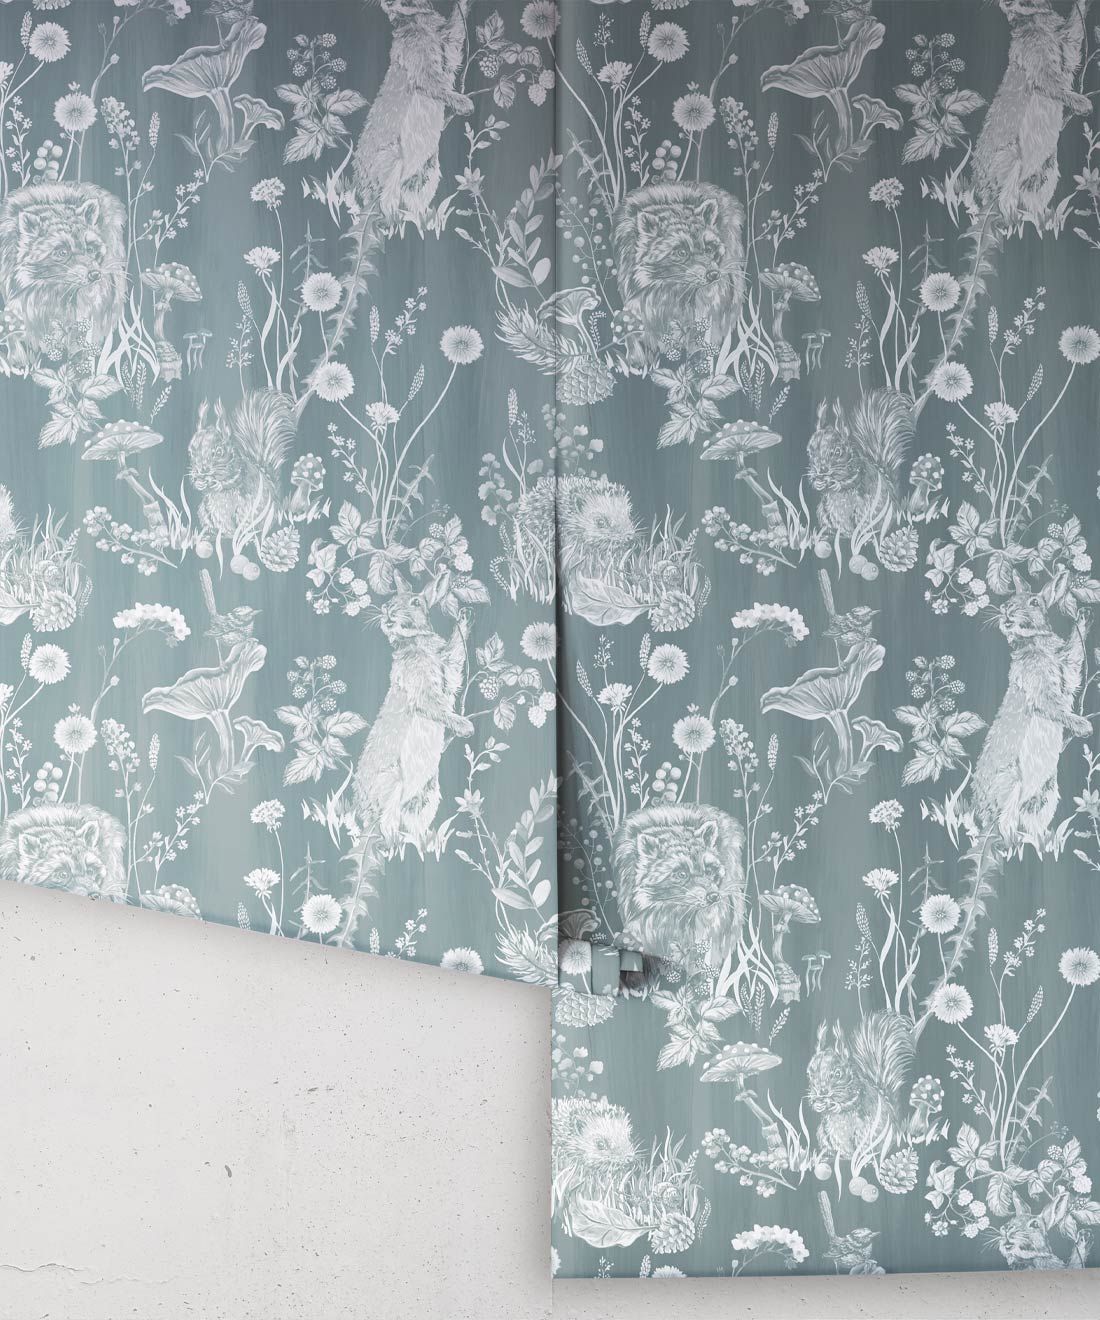 Woodland Friends Wallpaper • Forest Wallpaper with rabbits, hares, raccoons • Iryna Ruggeri • Duck Egg • Rolls